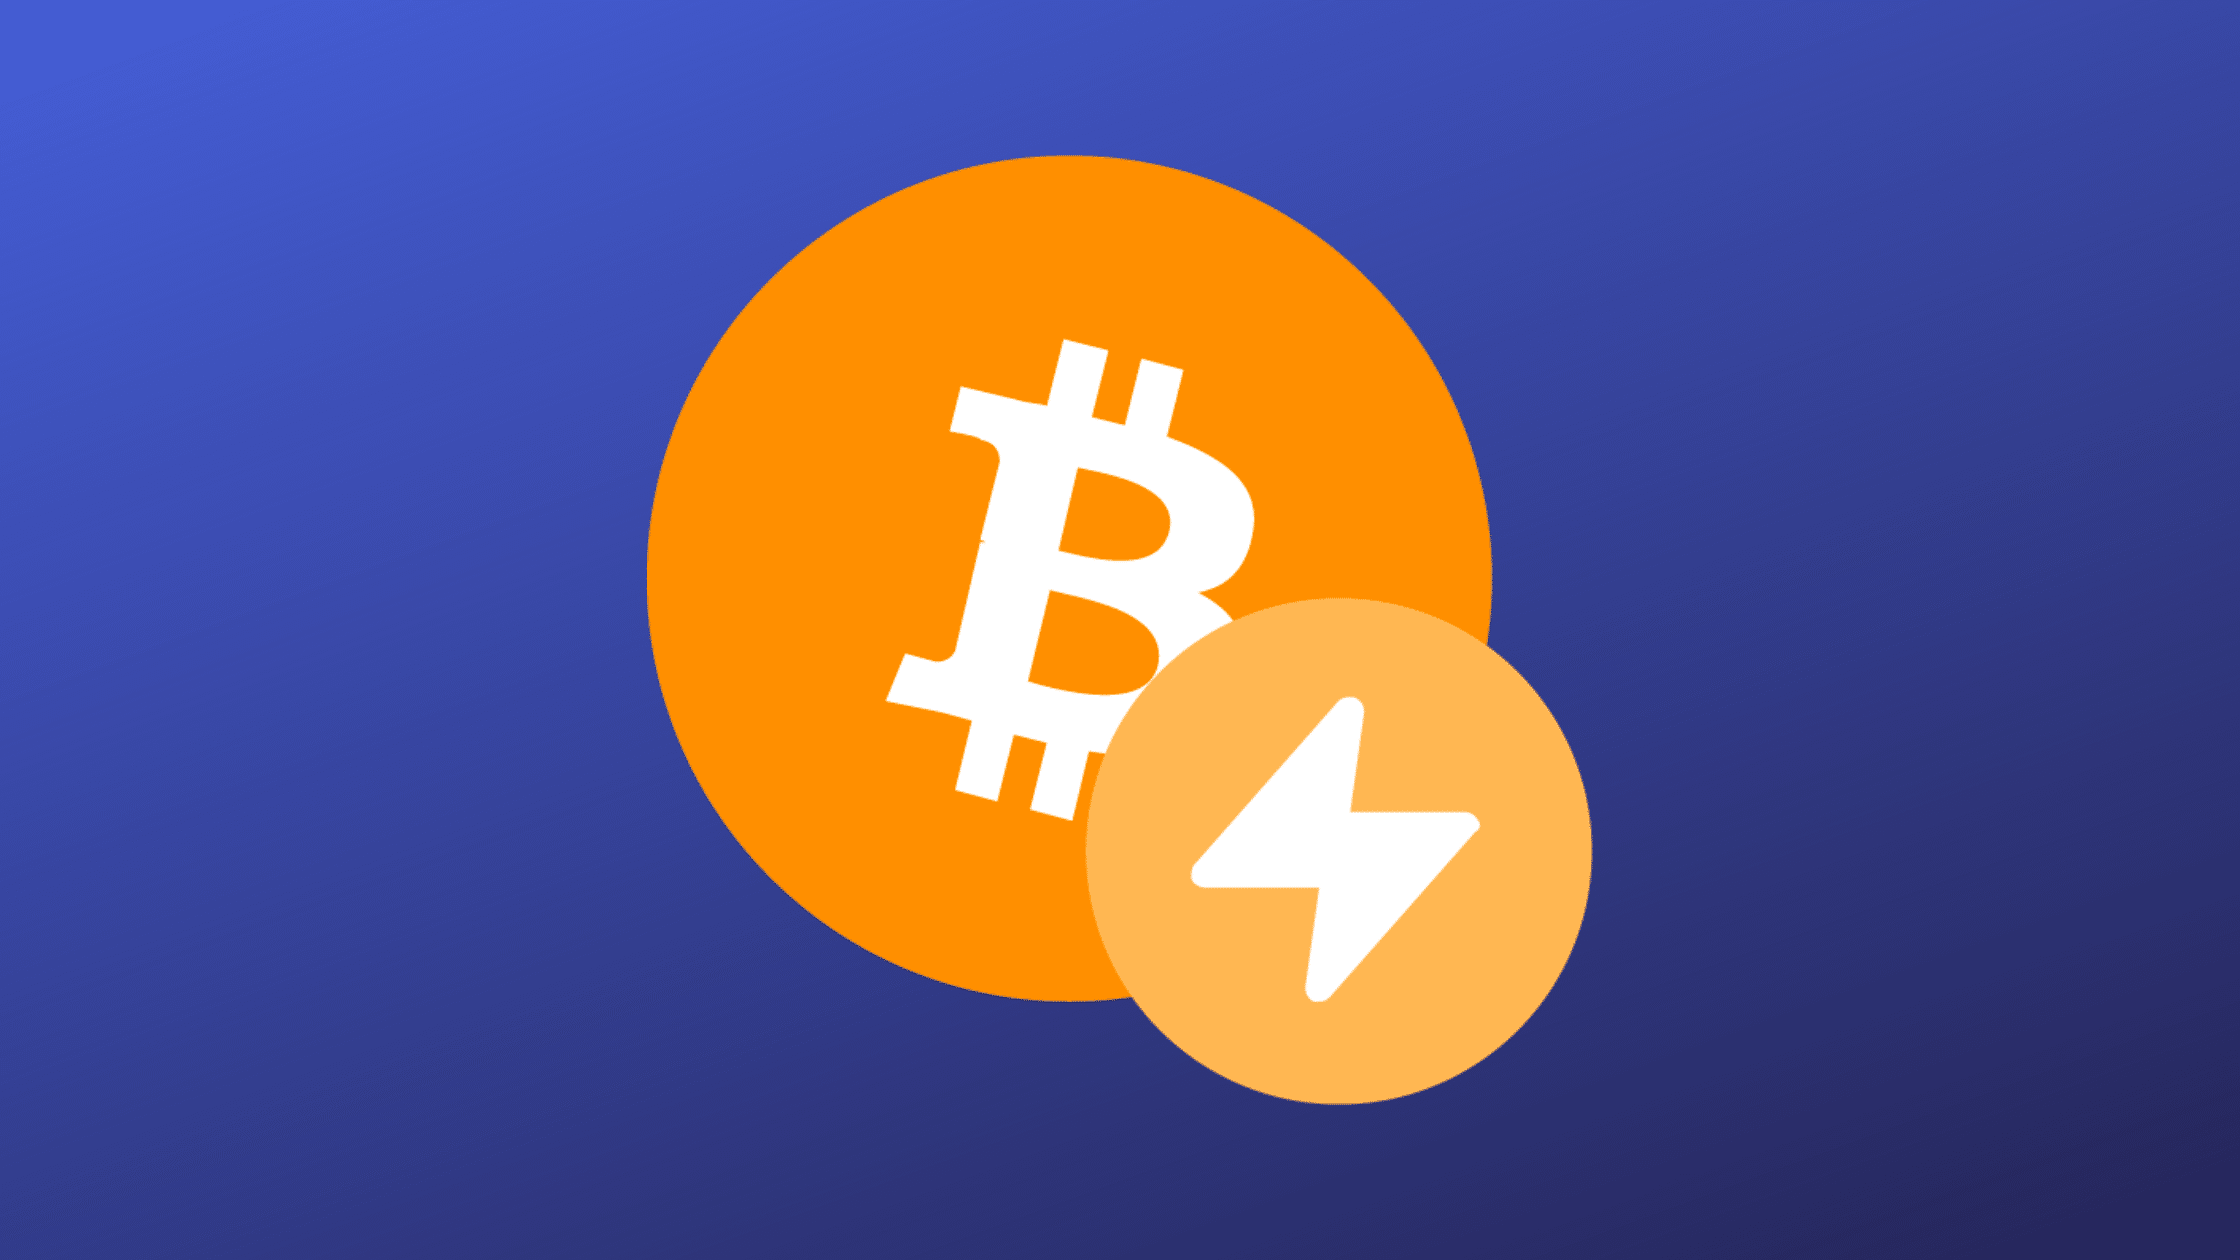 Are the Developers of Bitcoin Beginning to Lose Faith in Lightning?